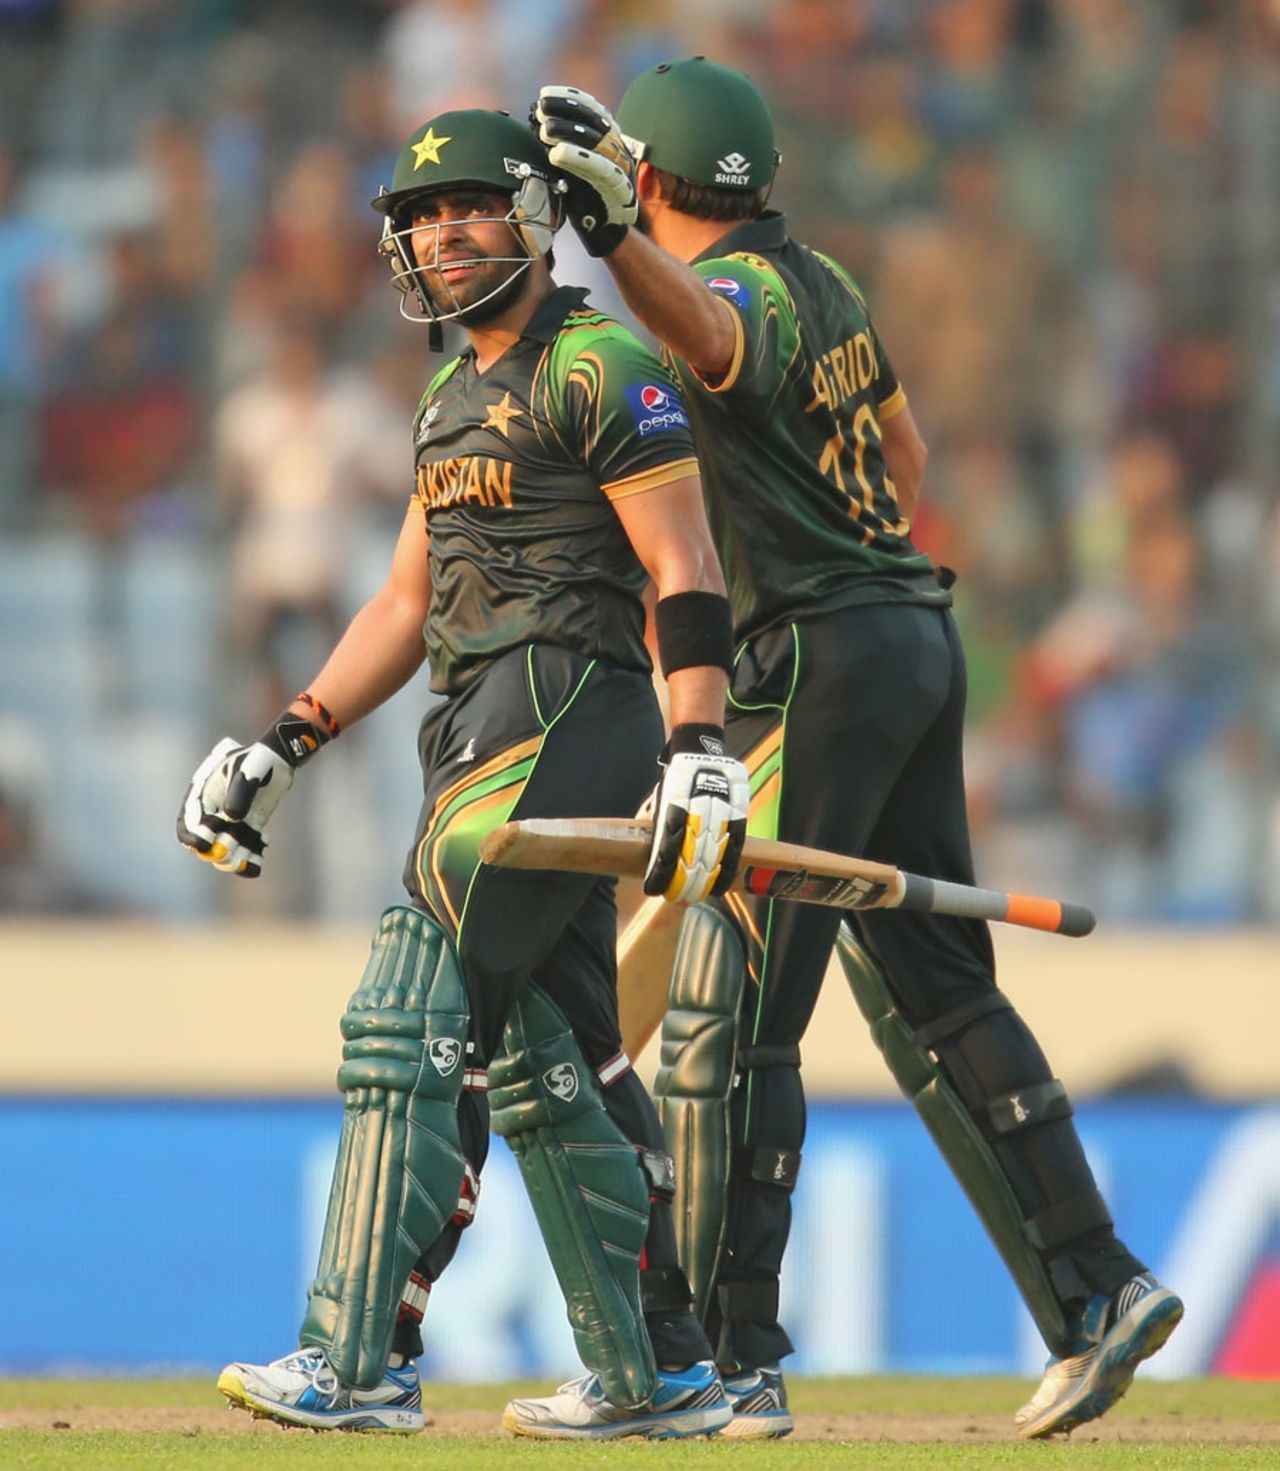 Shahid Afridi consoles Umar Akmal after the latter was out for 94, Australia v Pakistan, World T20, Group 2, Mirpur, March 23, 2014